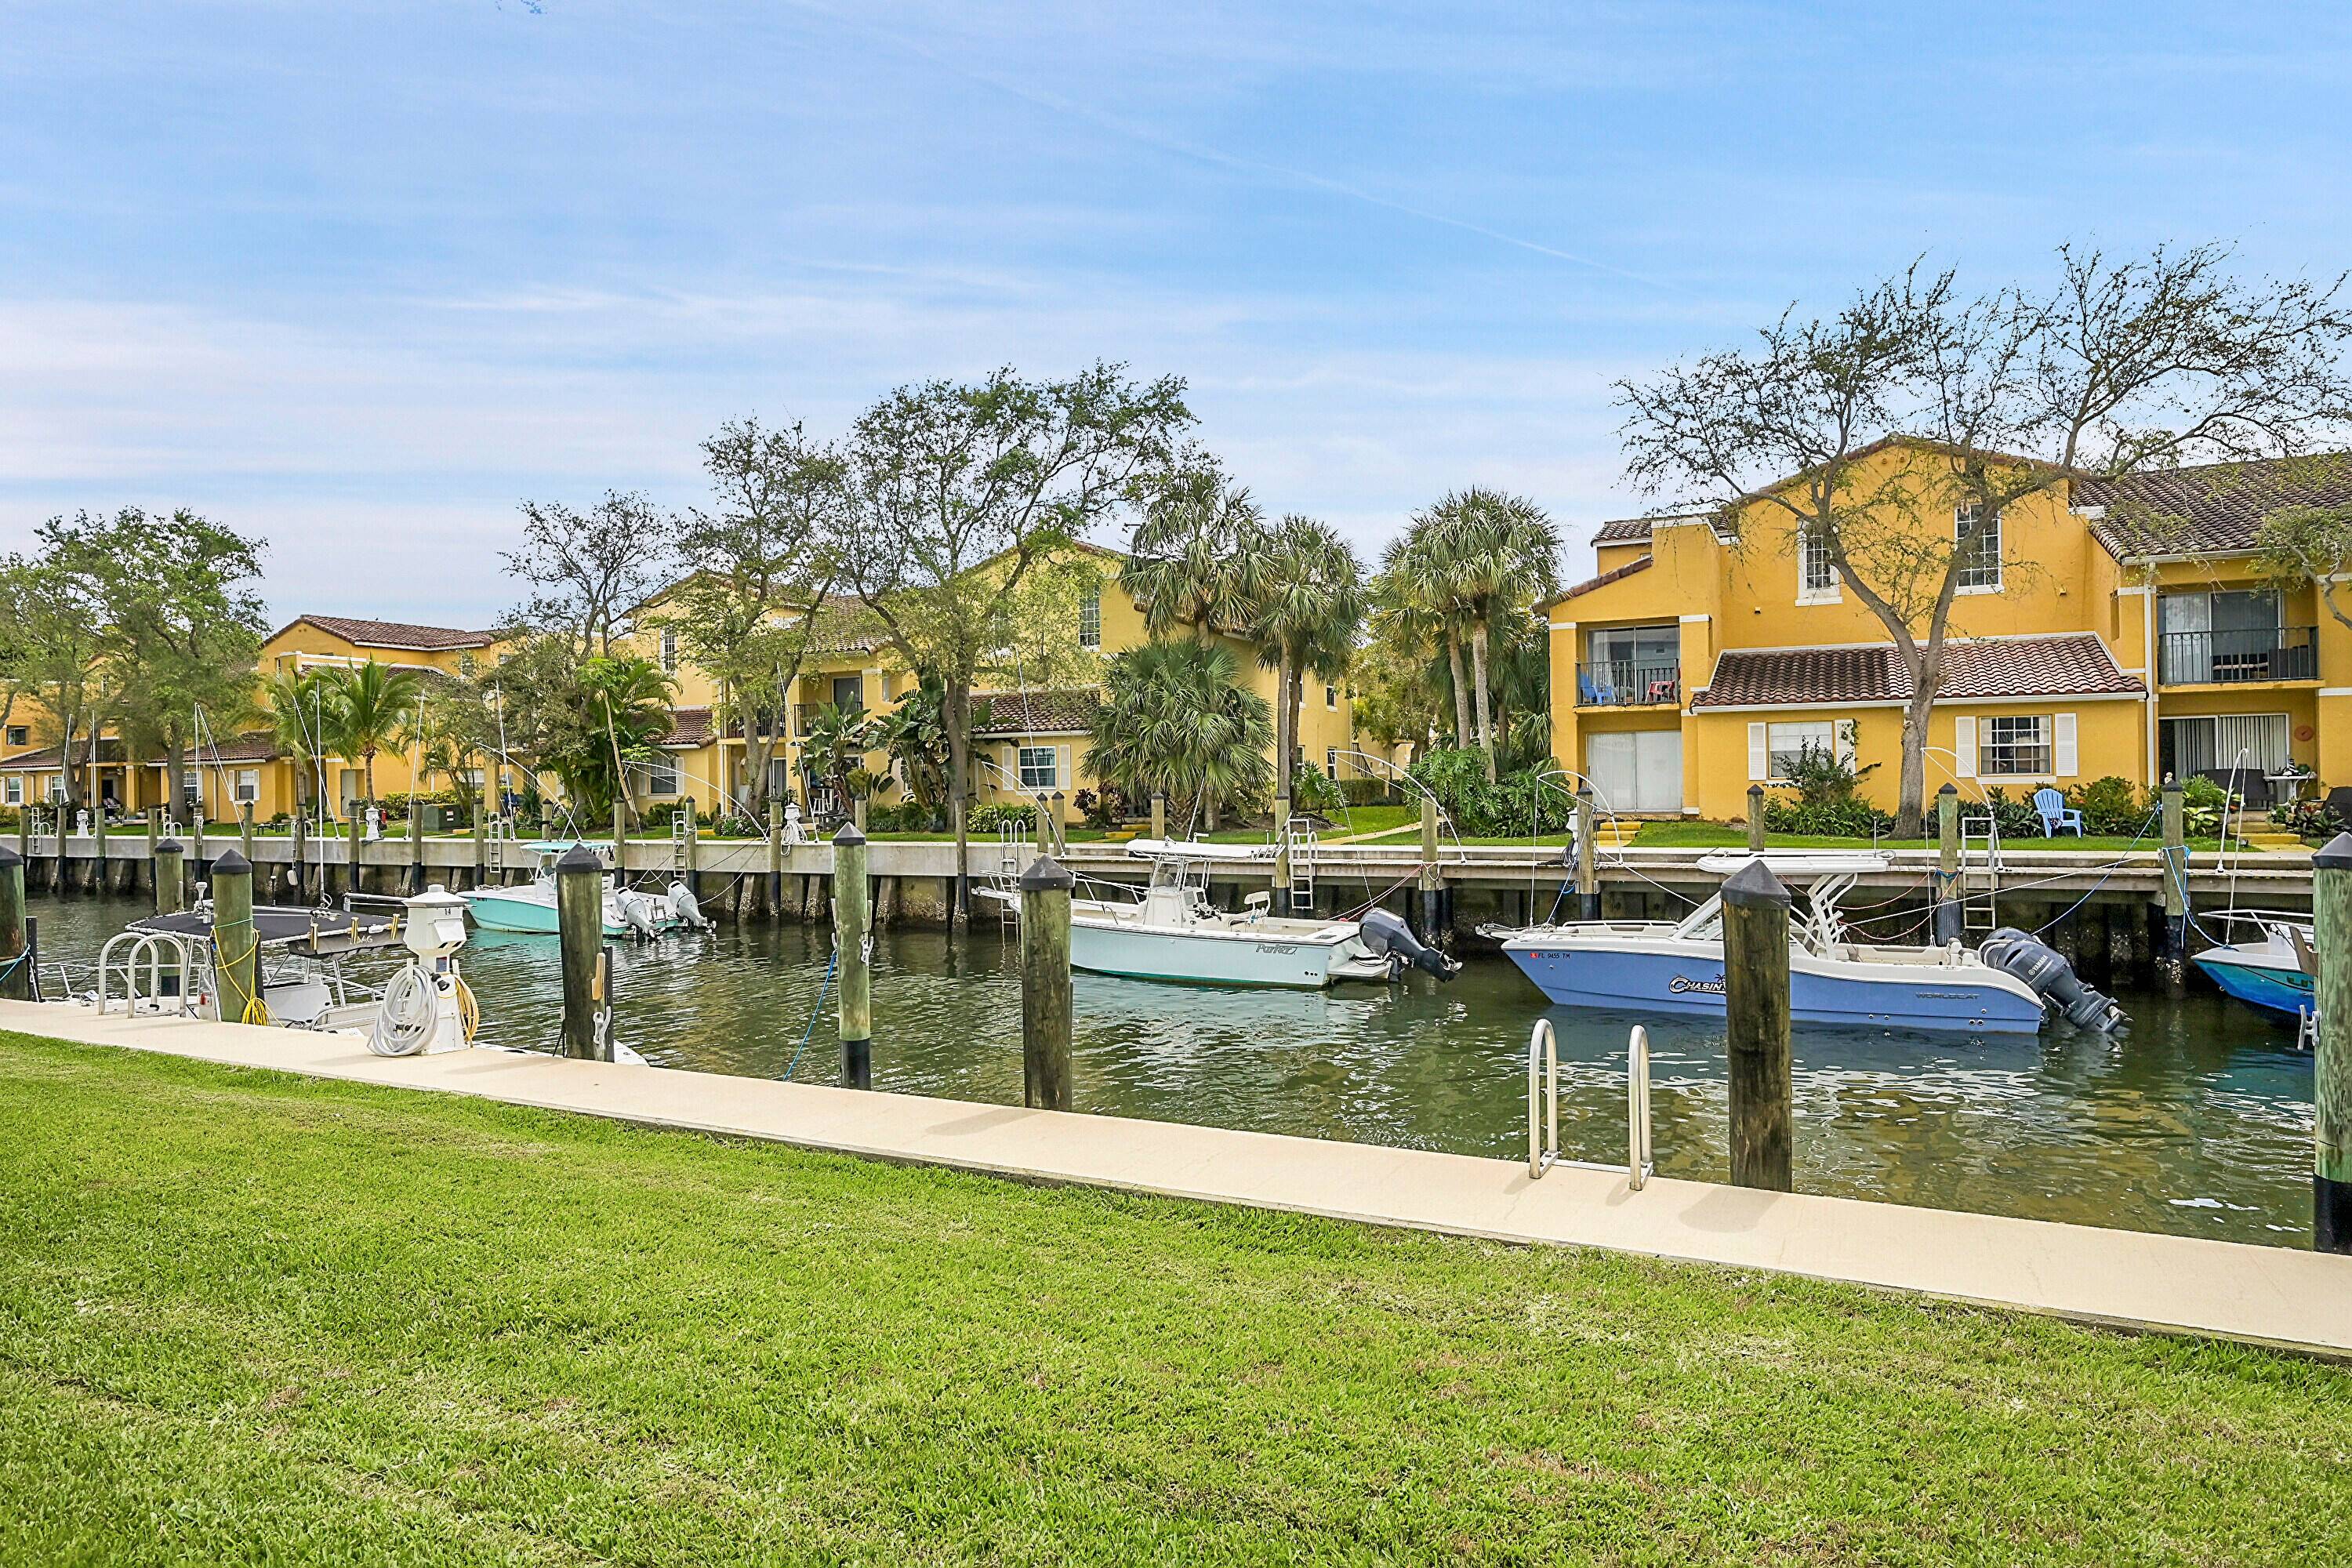 Top of the line scenic views of the intracoastal waterway and canal make this waterfront condo an ideal boaters paradise.